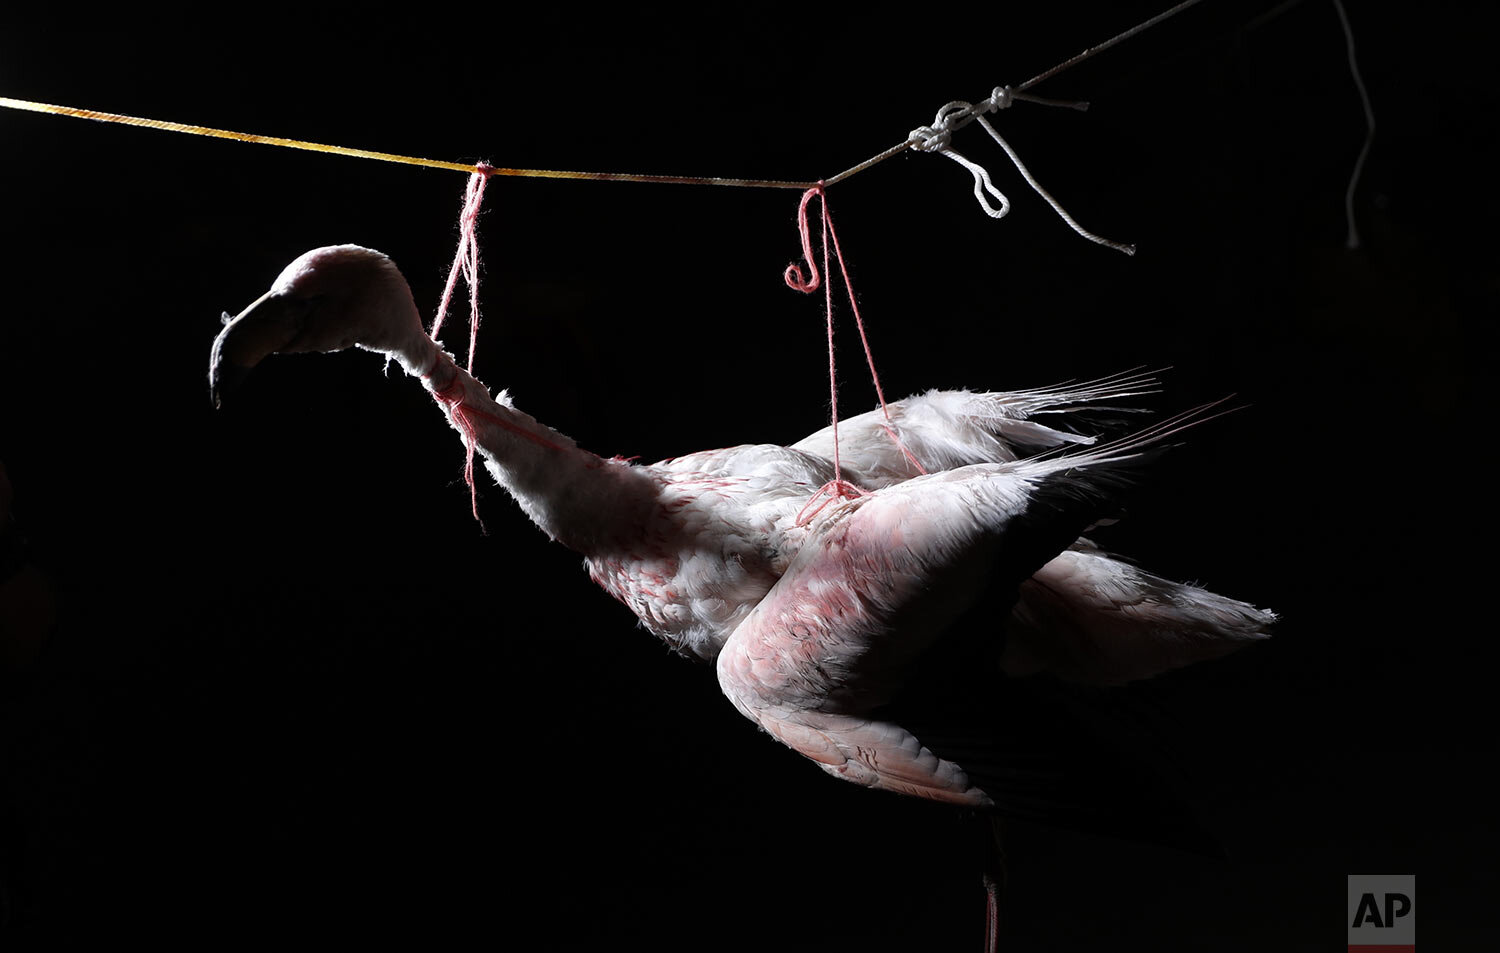  A stuffed flamingo hangs in the home of Mayor Rufino Choque in the Urus del Lago Poopo Indigenous community, in Punaca, Bolivia, May 23, 2021. Choque said the Uru - “people of the water” - began settling on the lakeshore several decades ago as the l